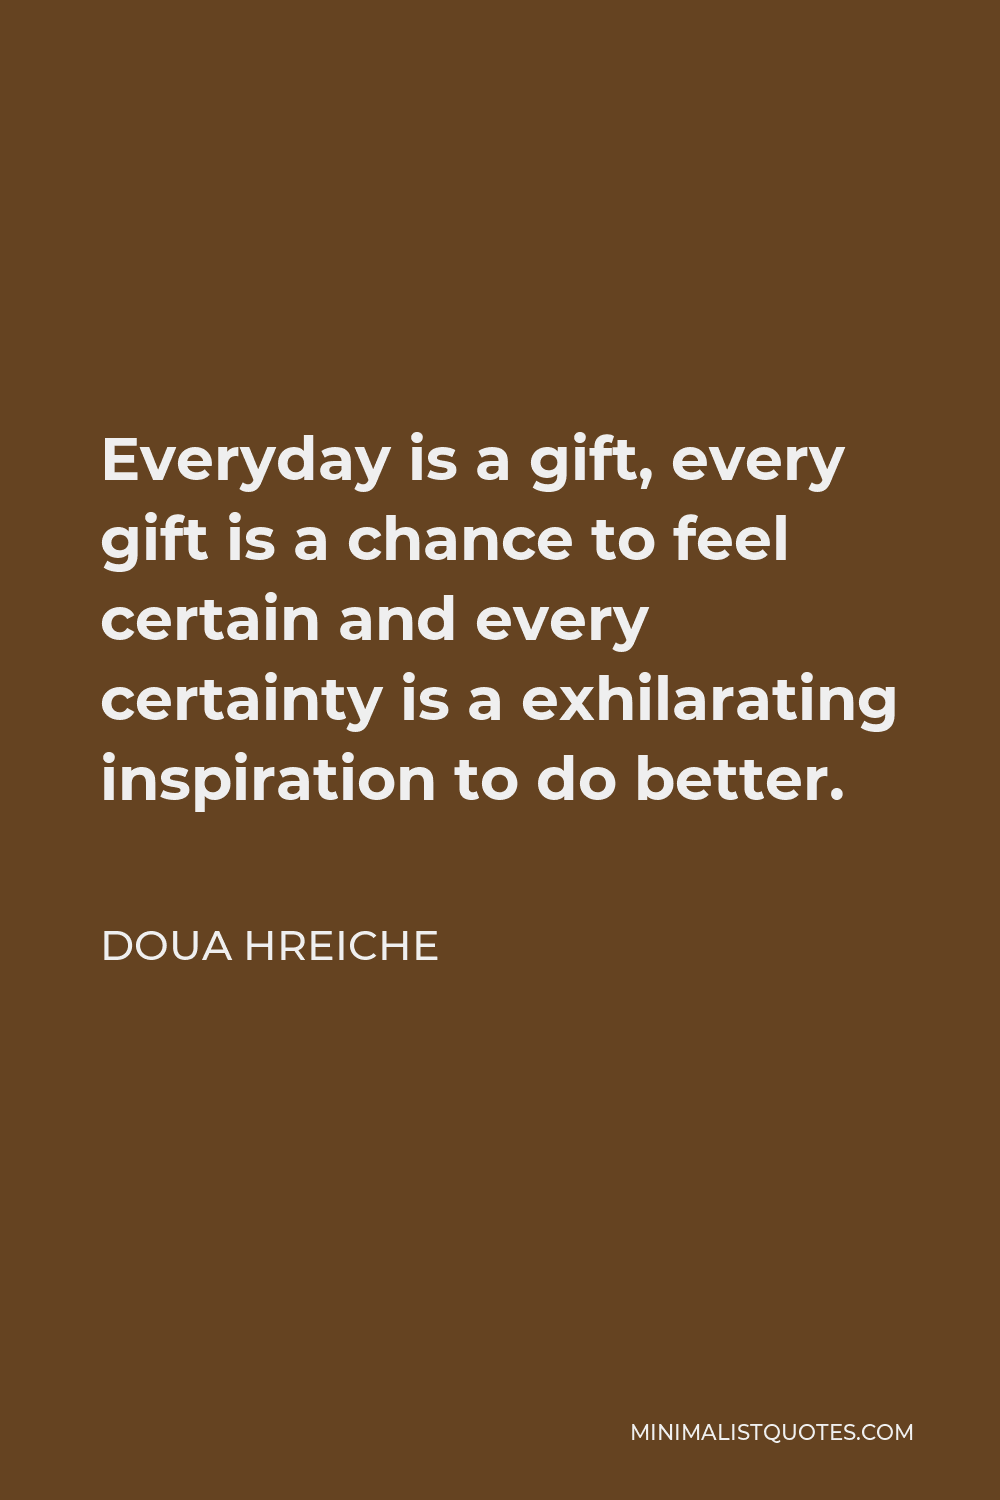 Doua Hreiche Quote - Everyday is a gift, every gift is a chance to feel certain and every certainty is a exhilarating inspiration to do better.